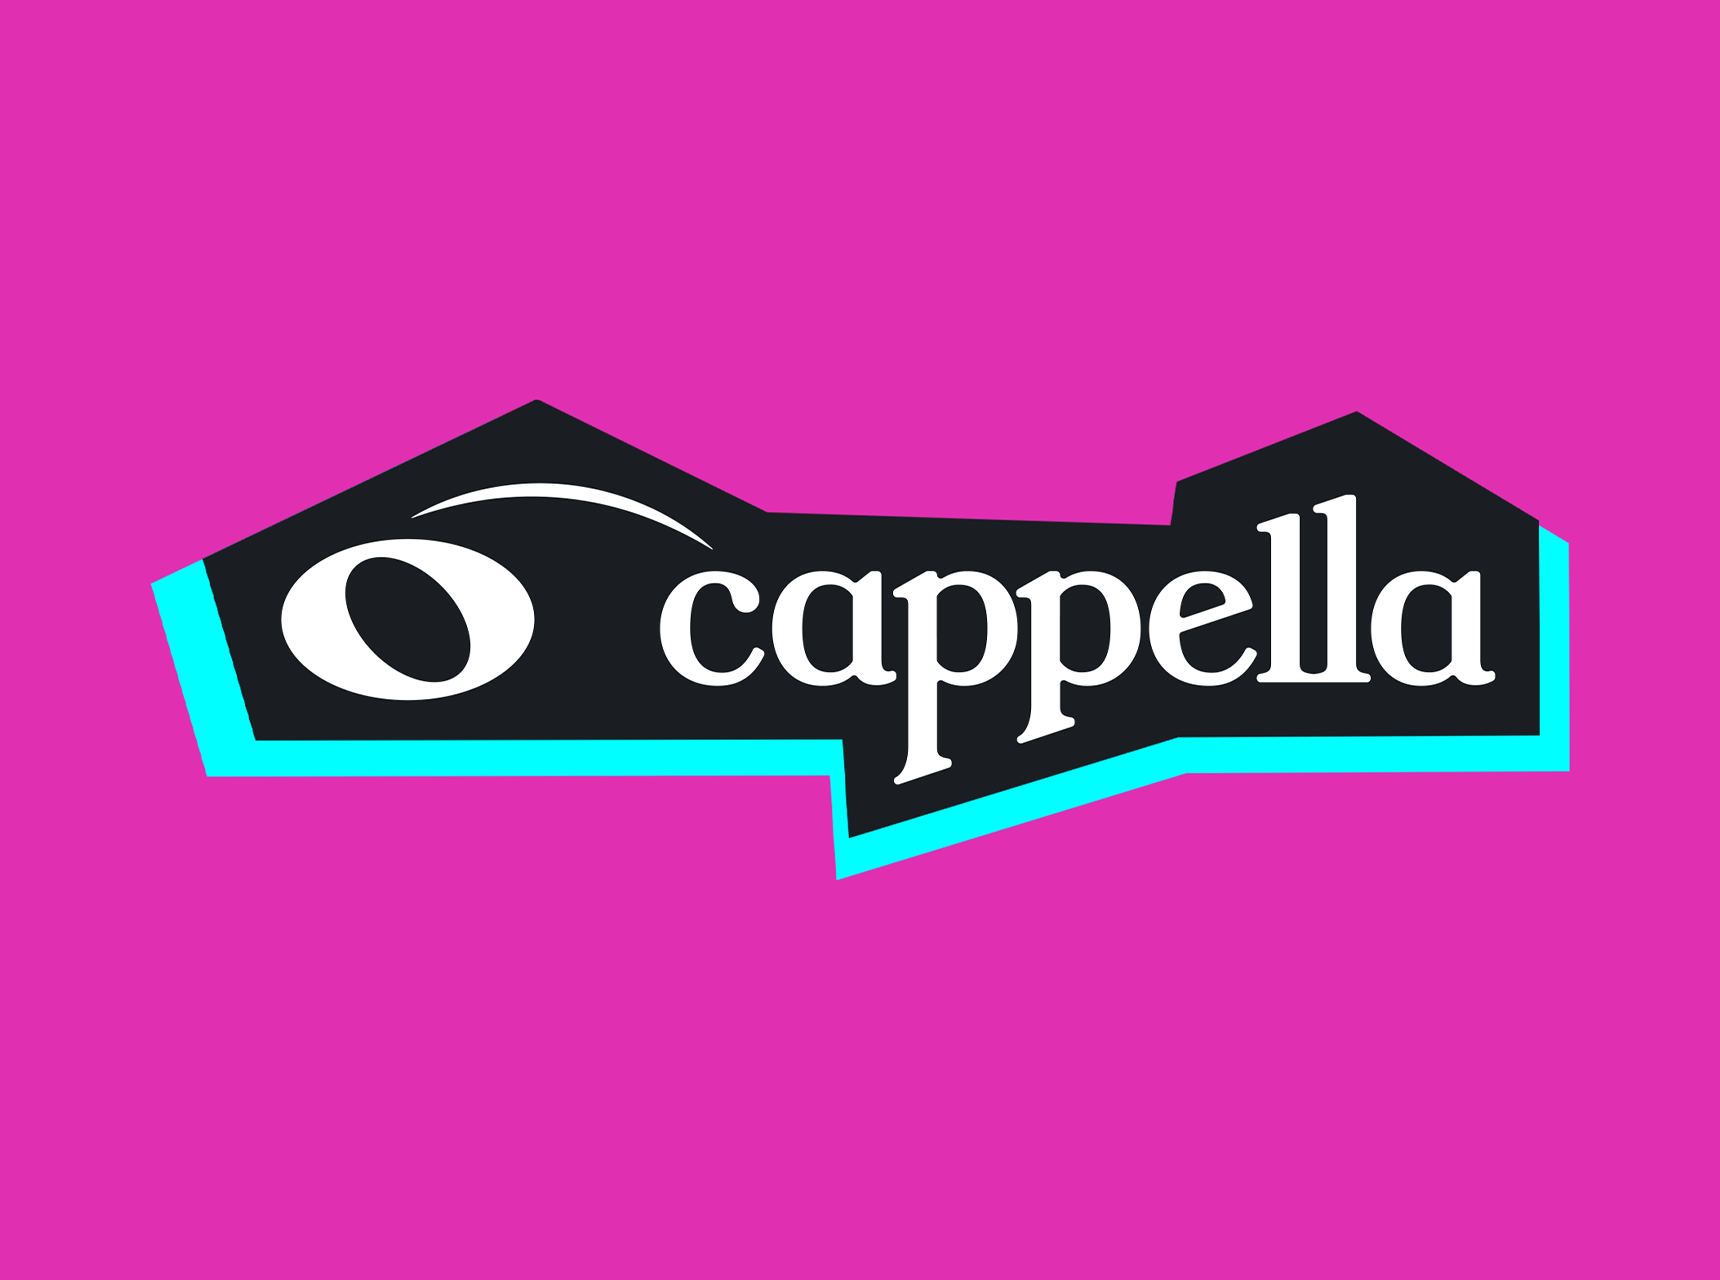 Words O Cappella on a Pink background